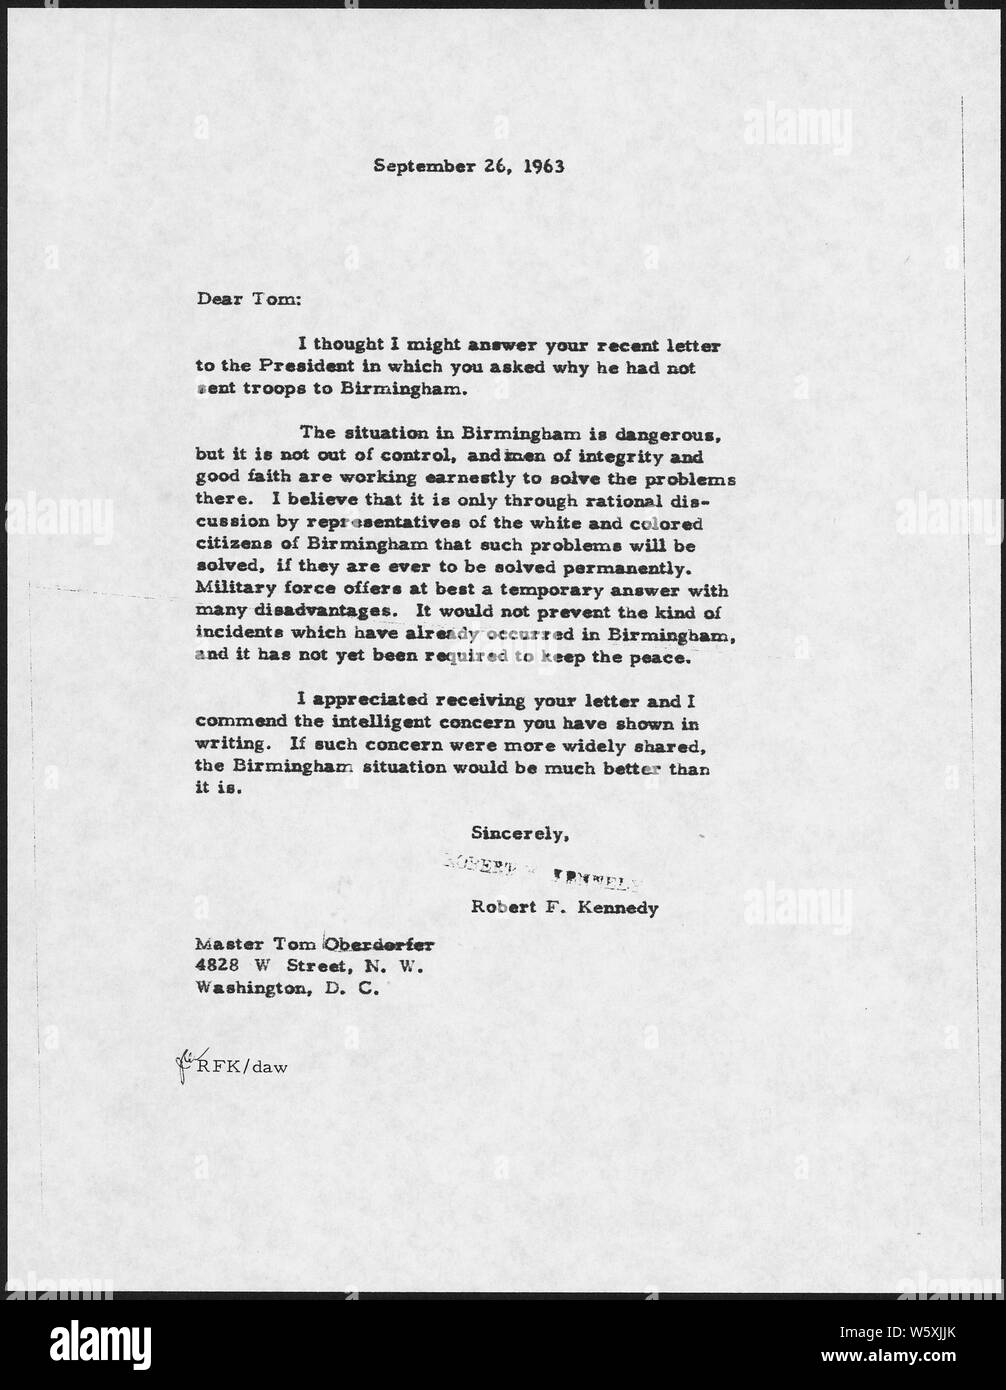 Robert F. Kennedy Letter Birmingham, Alabama September 26, 1963; Scope and content:  Robert F. Kennedy's response to child's letter on stituation in Birmingham, Alabama. General notes:  Kennedy,John F. Stock Photo